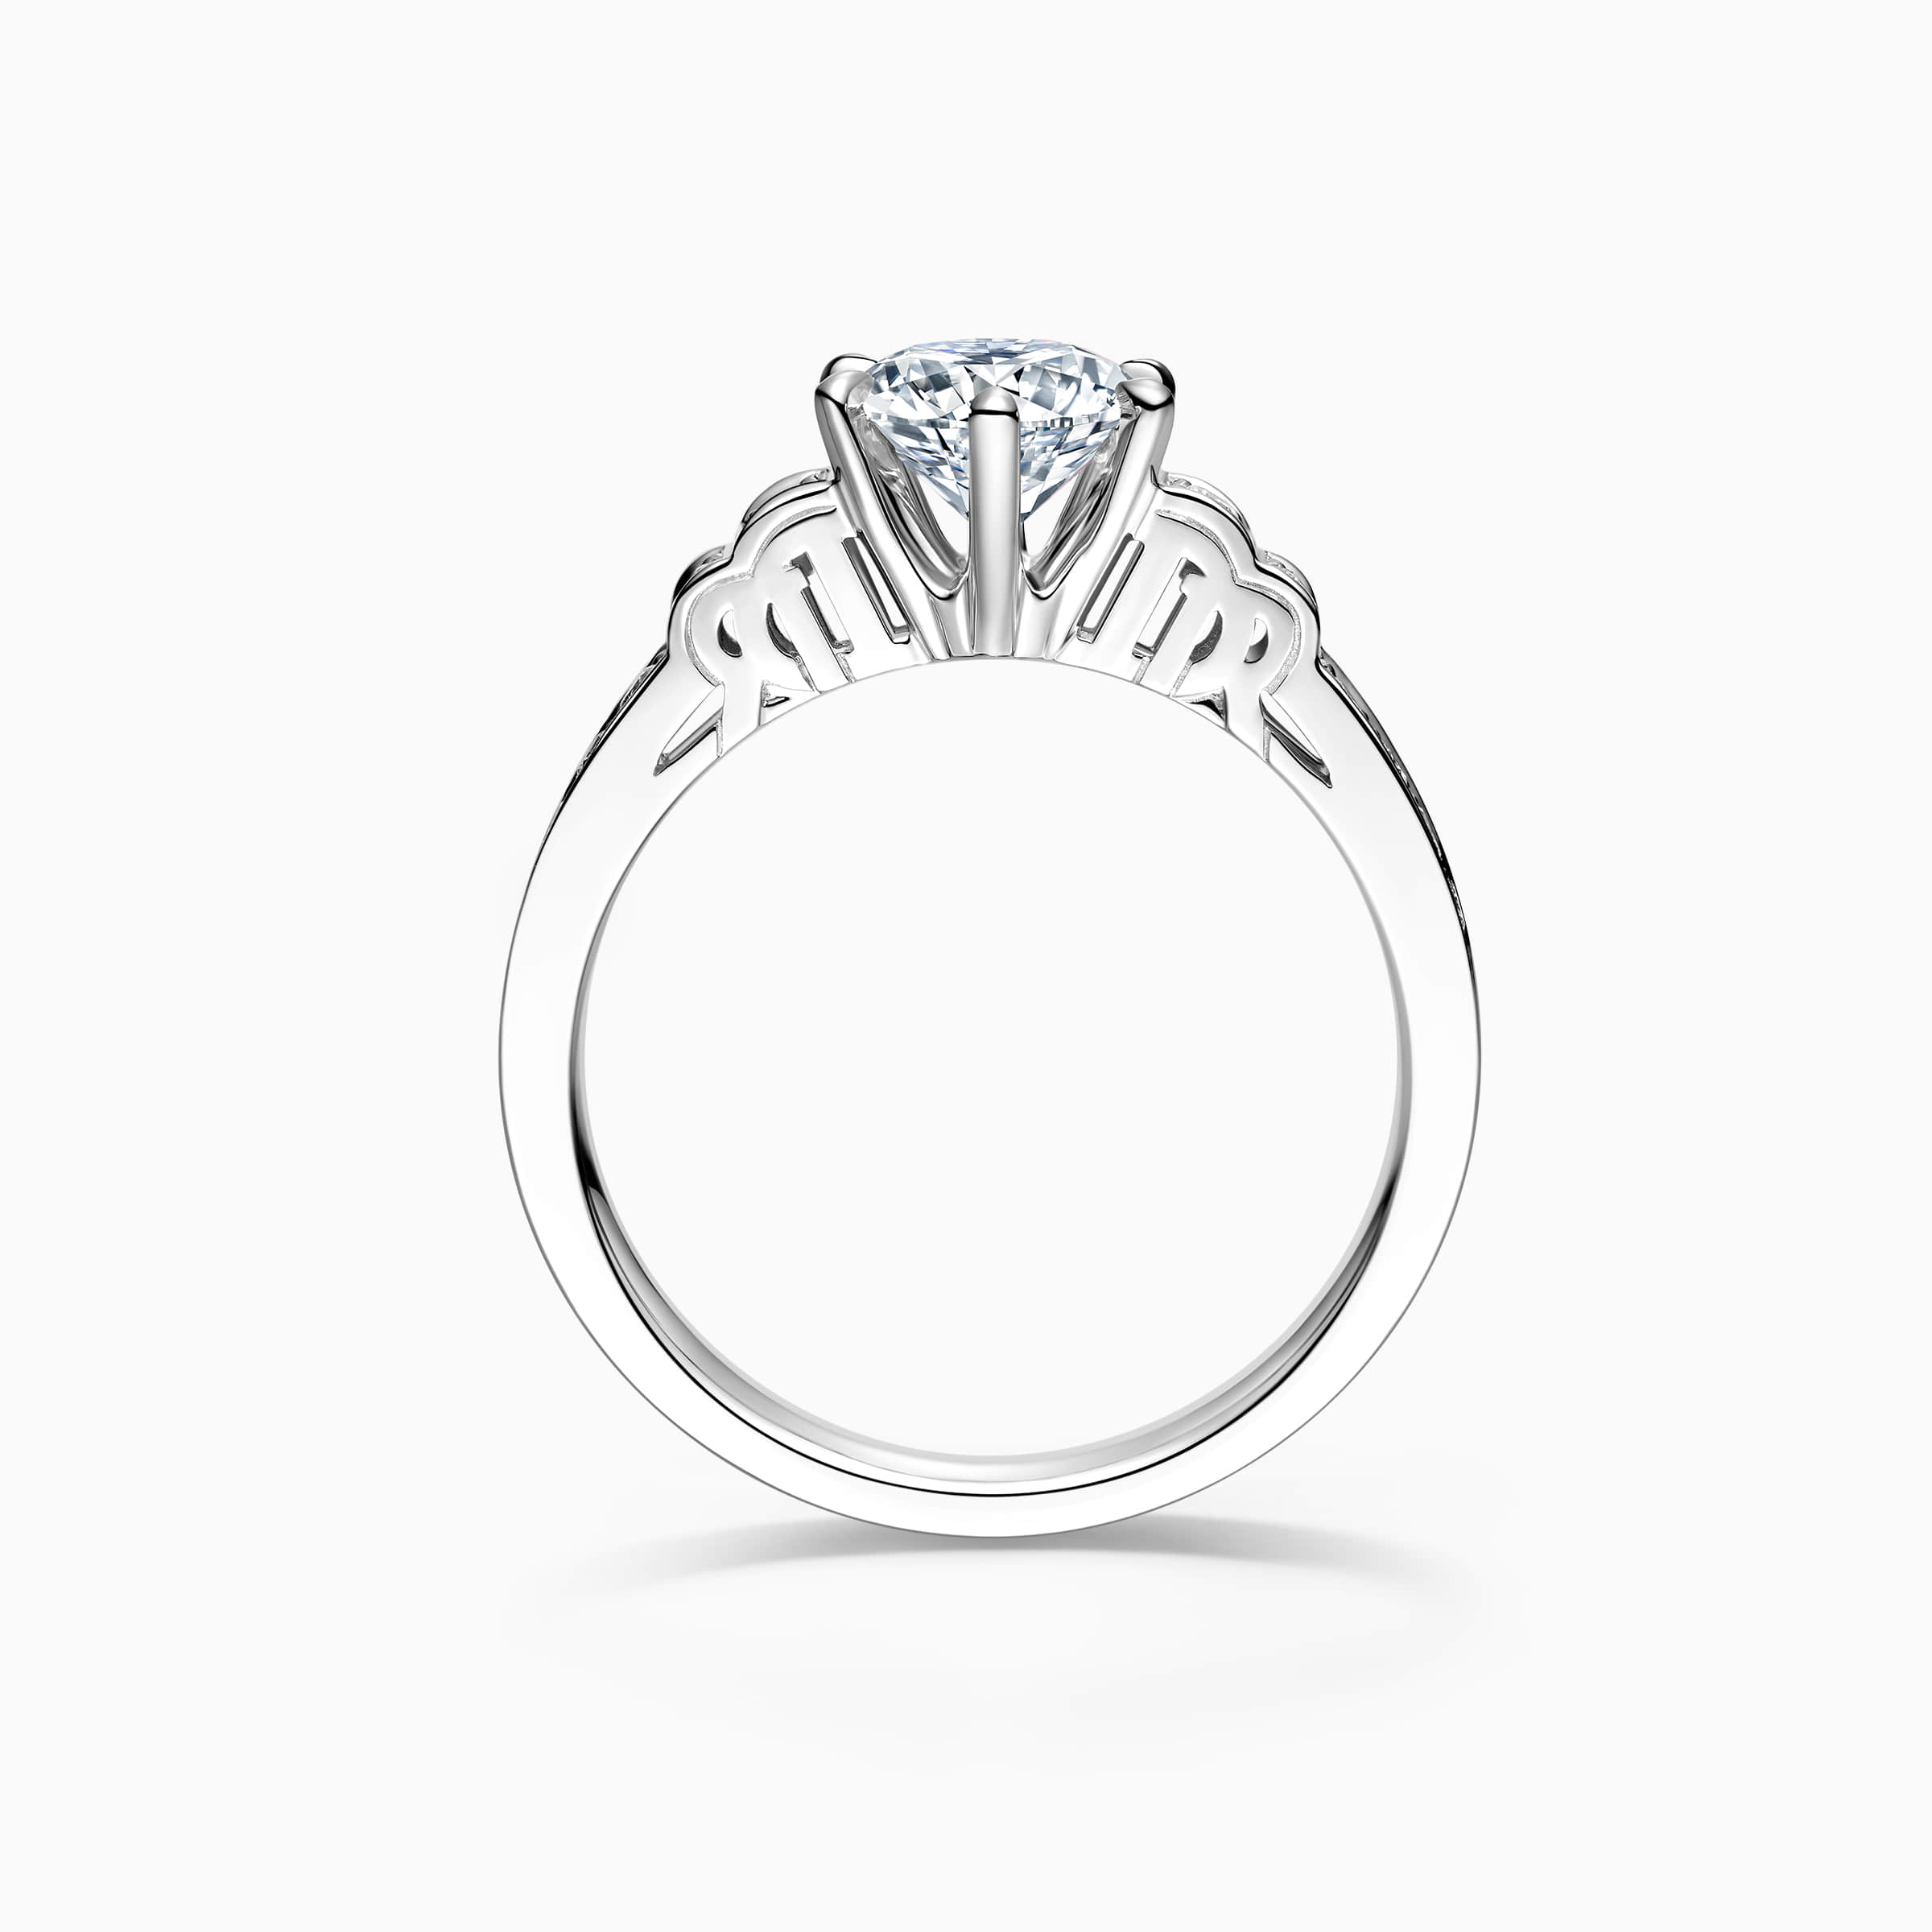 Darry Ring Love Mark engagement ring